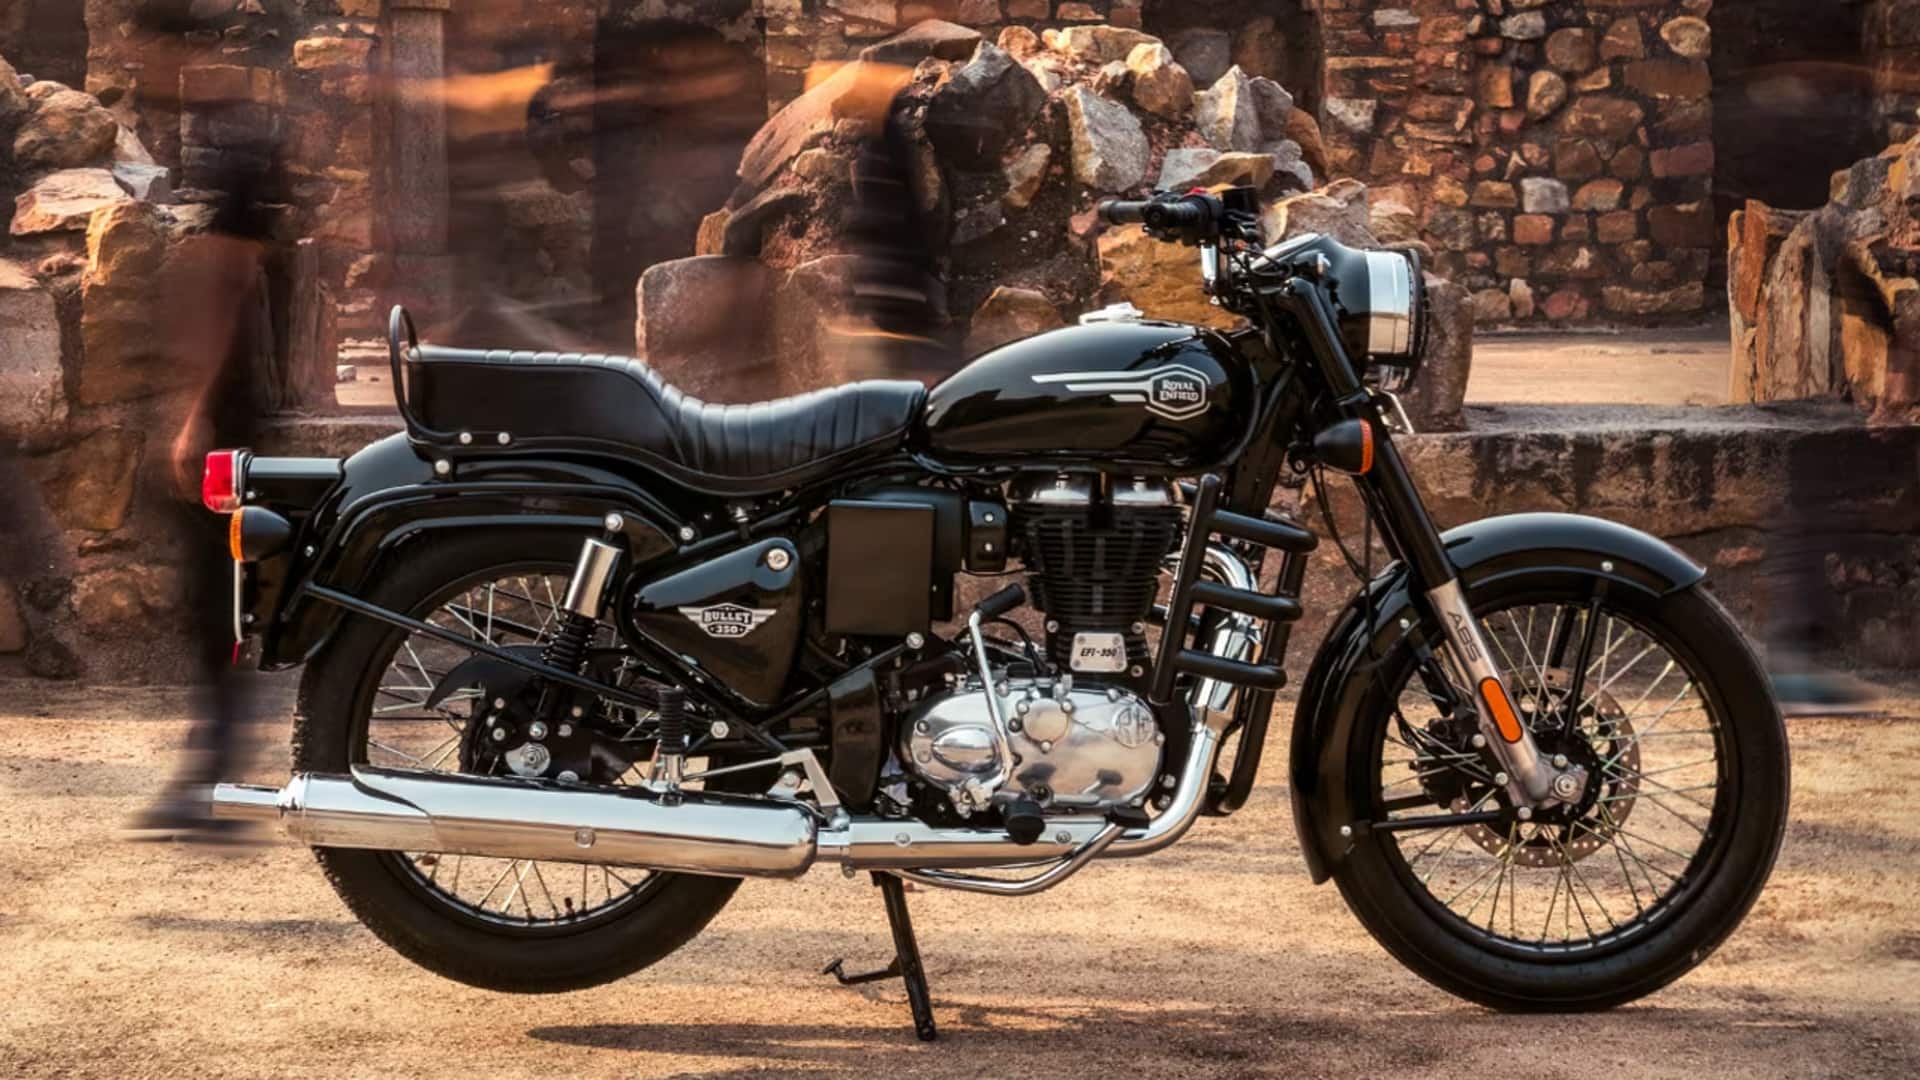 2023 Royal Enfield Bullet 350: Everything we know so far